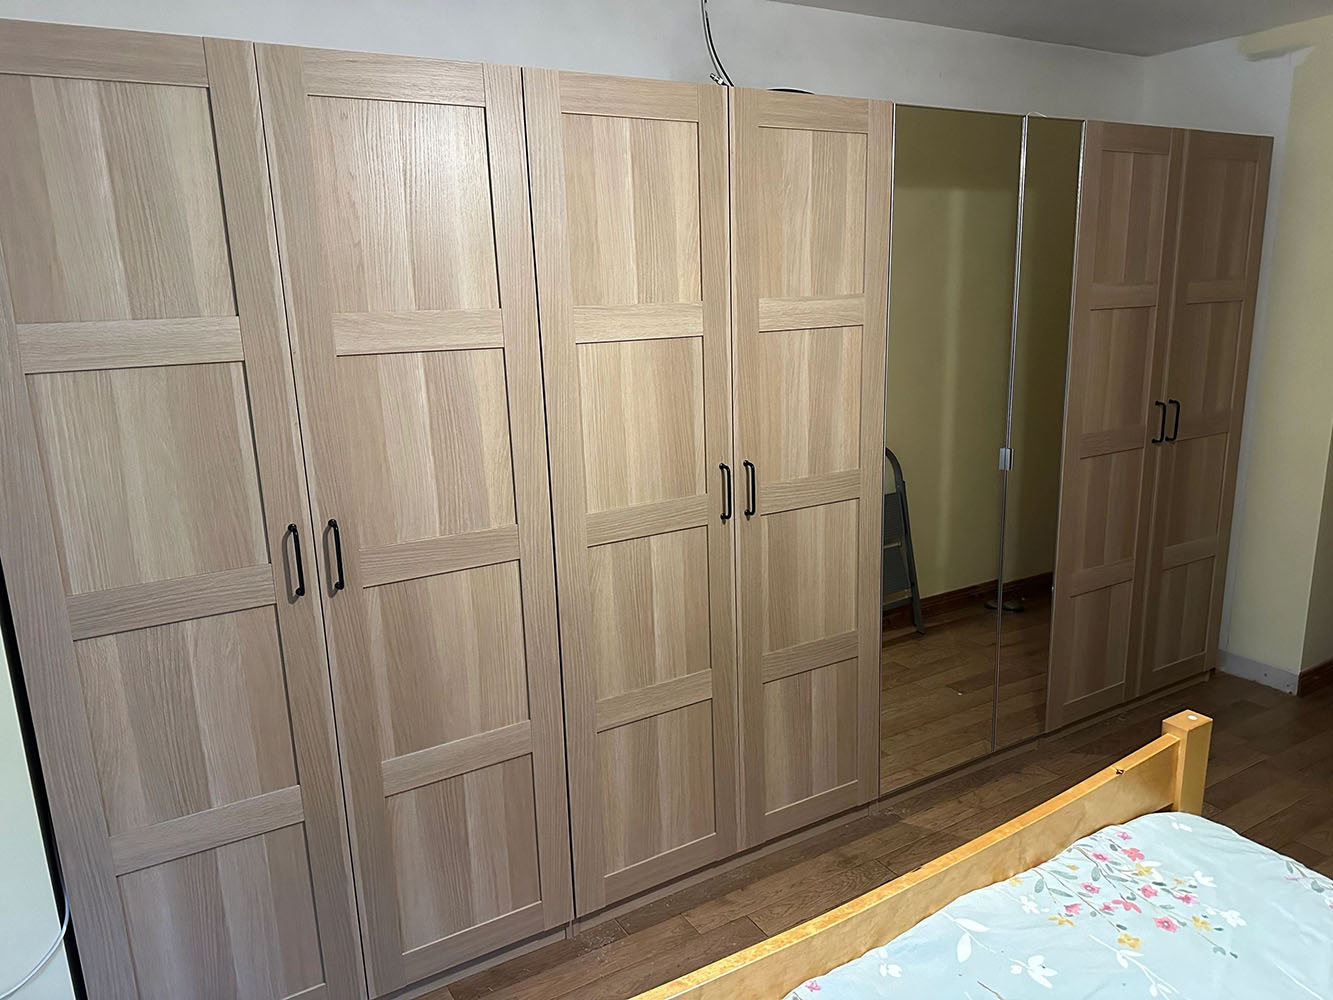 Large fitted wardrobe